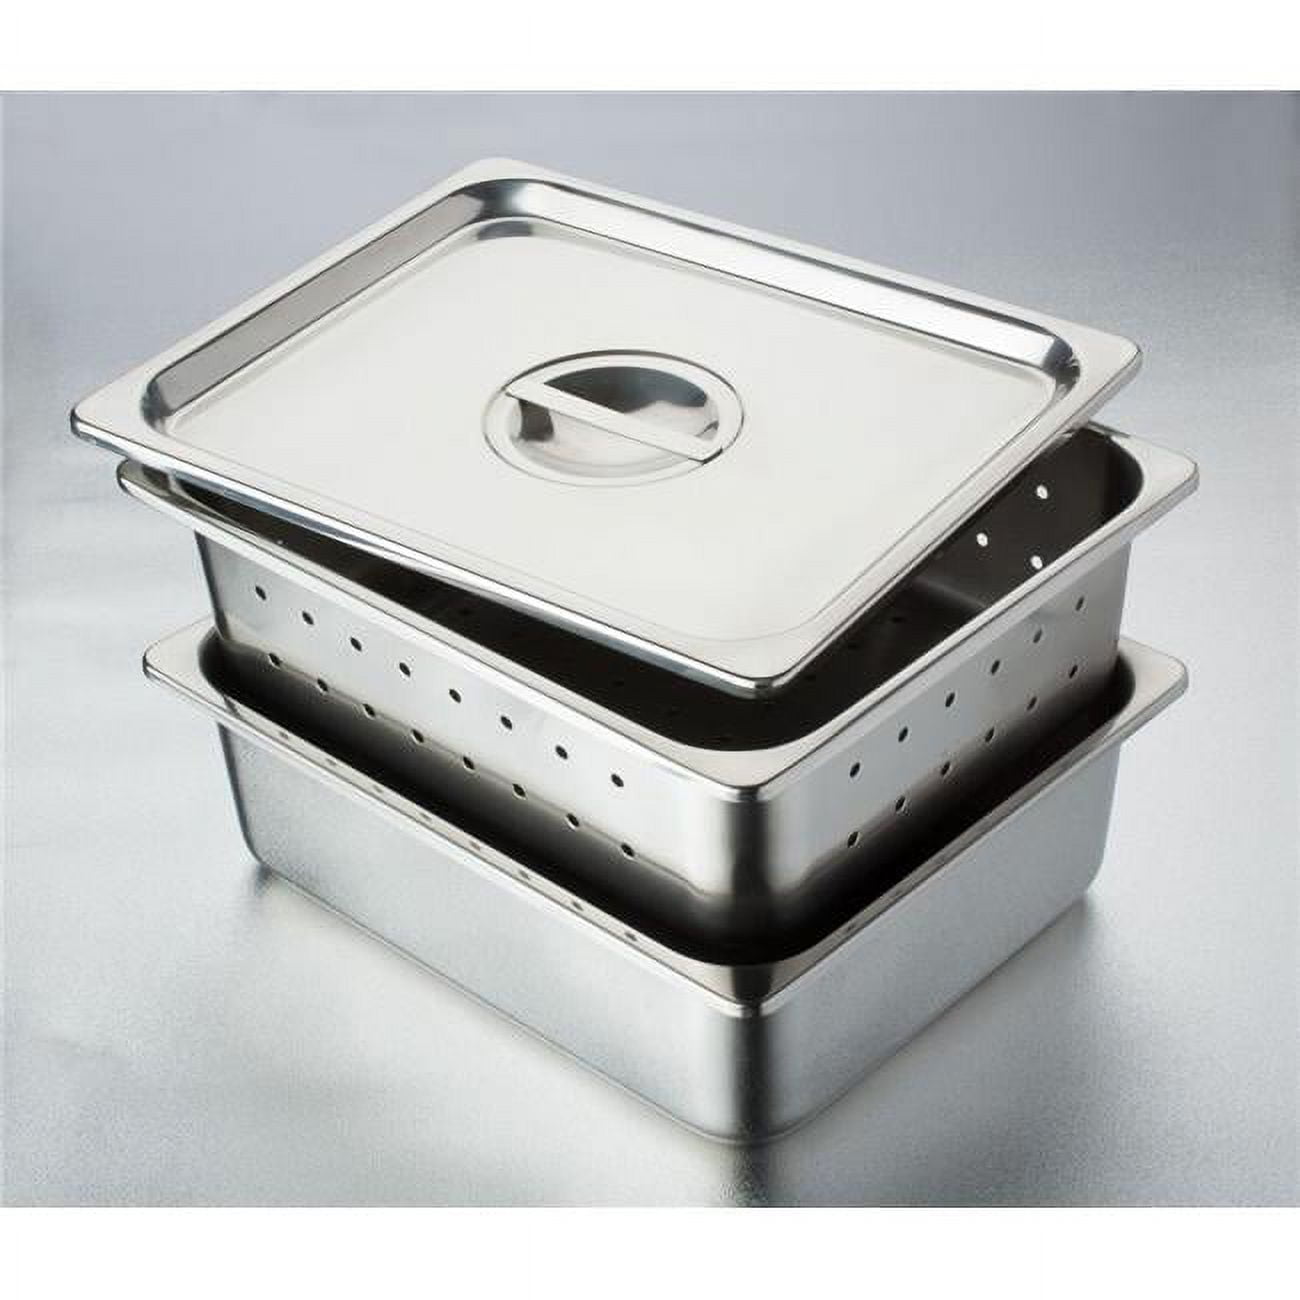 4273 12.5 X 7 X 4 In. Stainless Steel Instrument Tray With No Cover